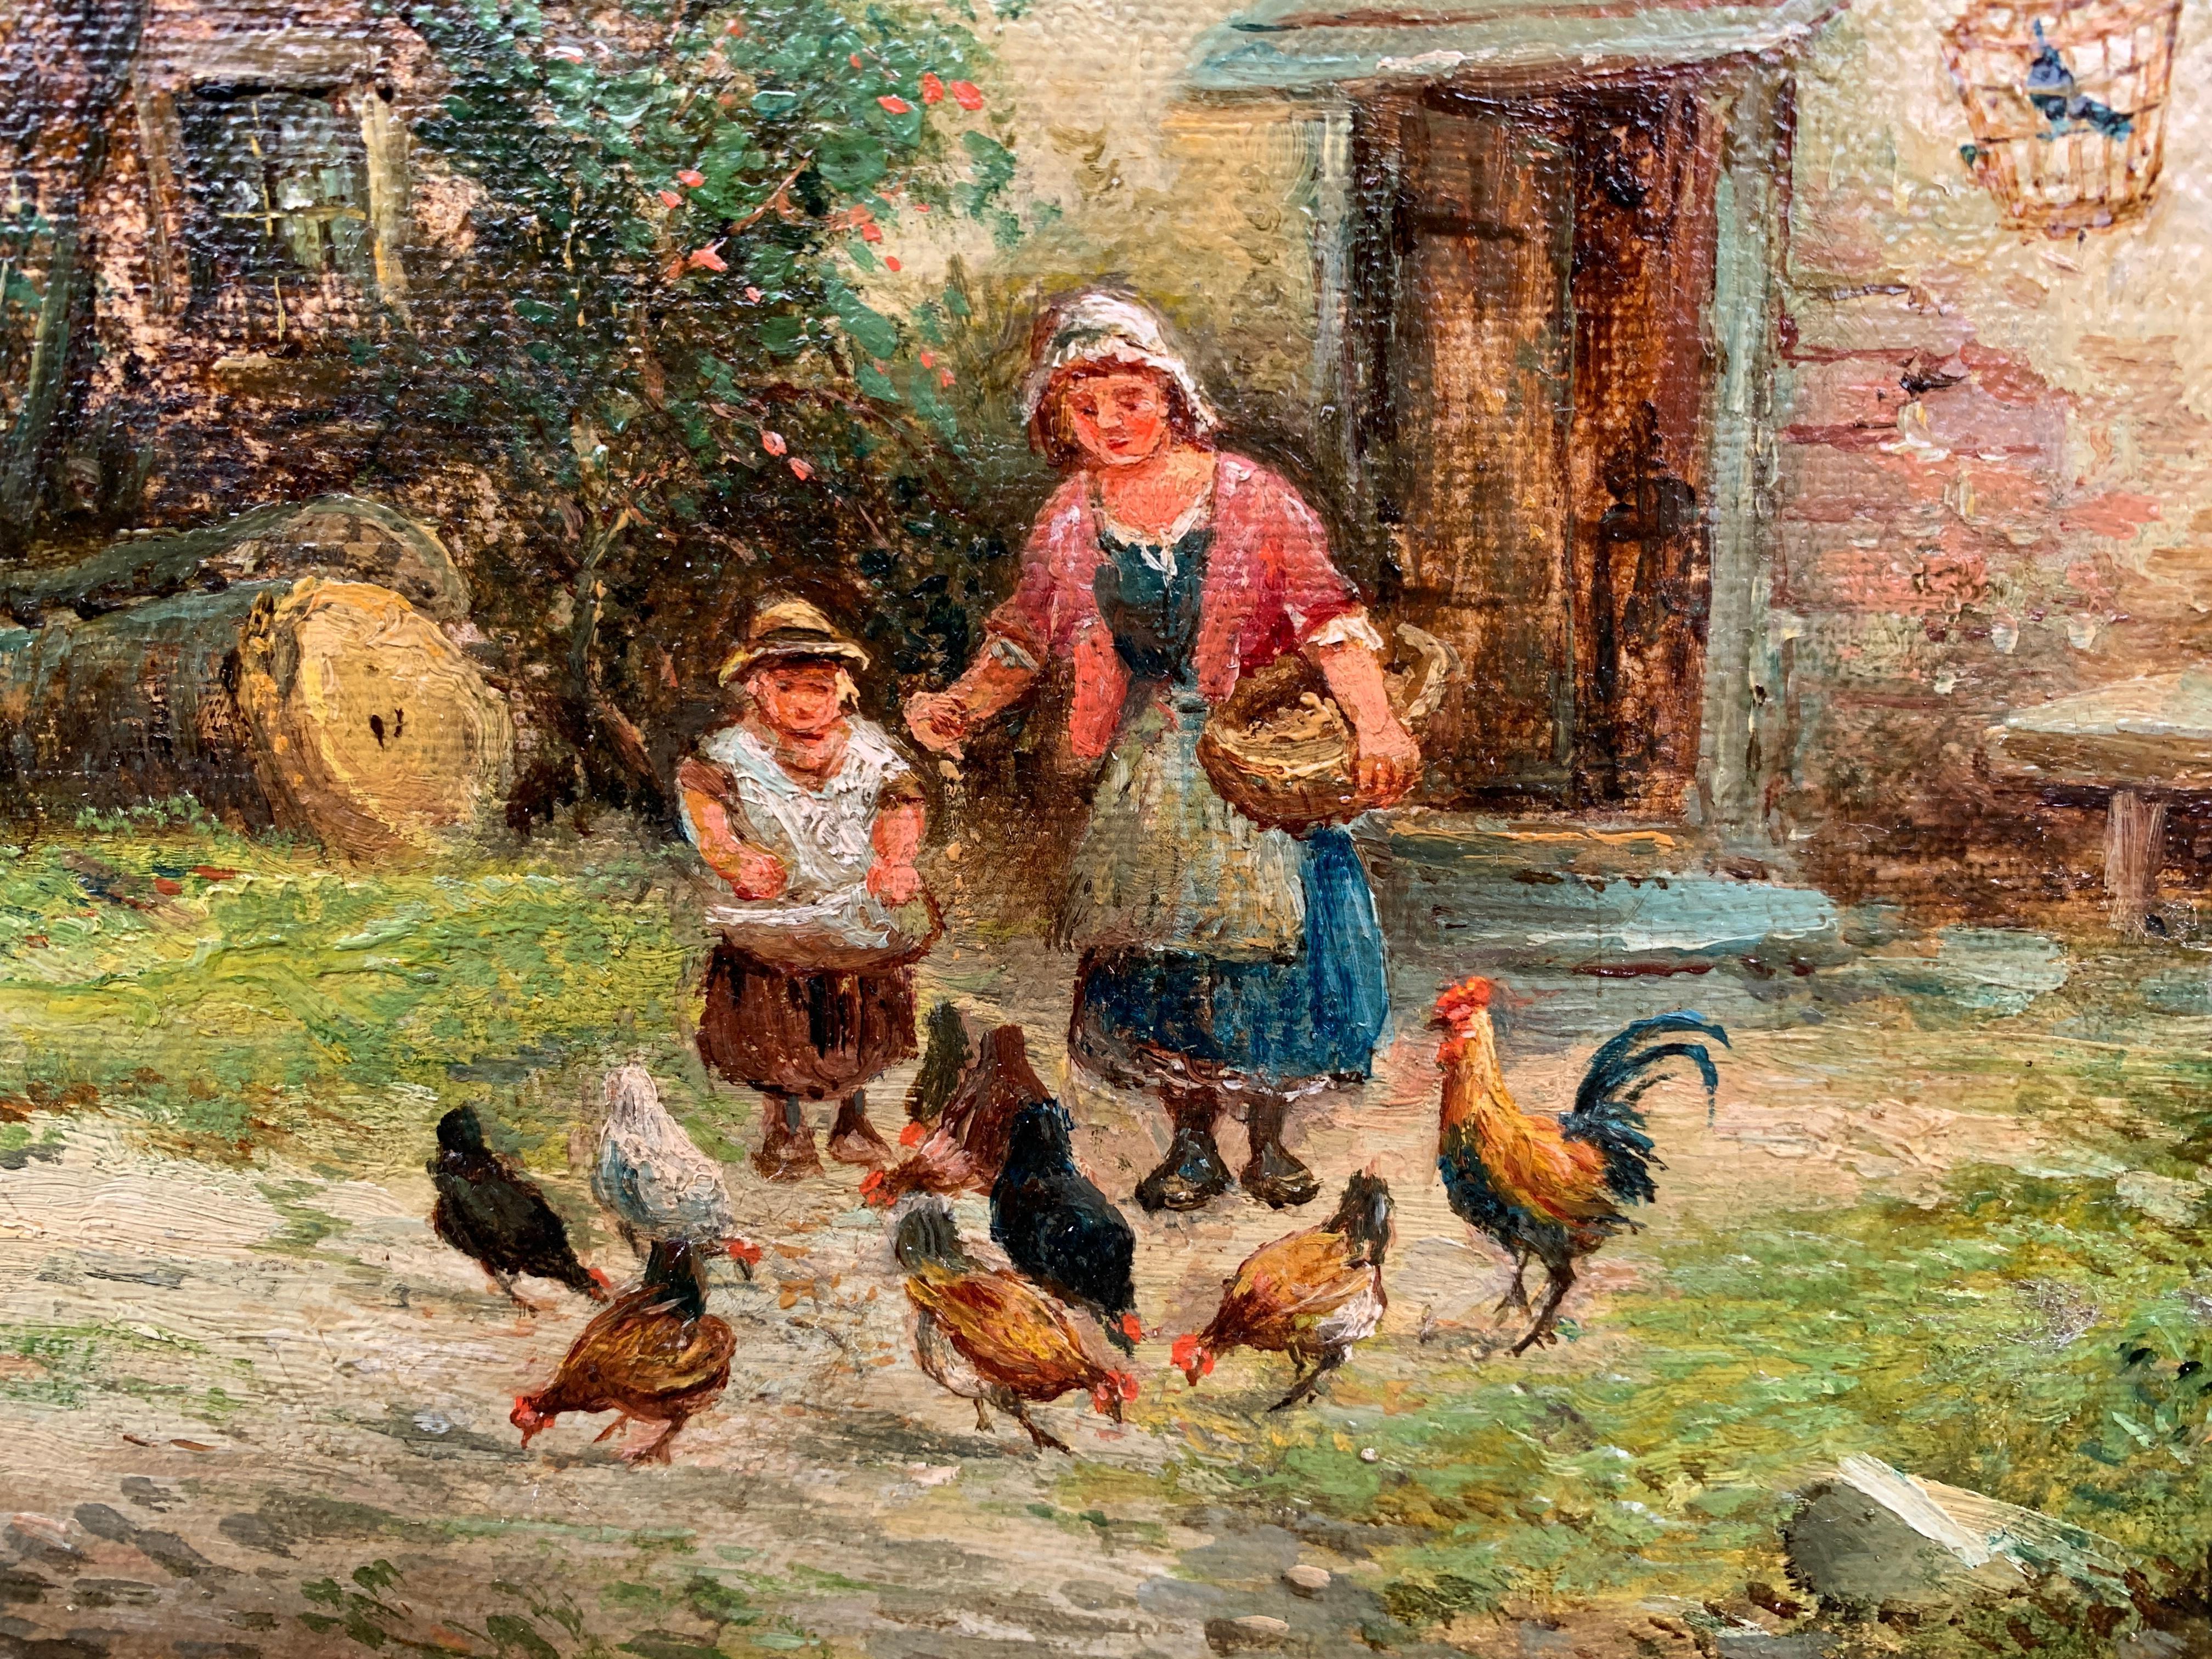 19th century English/British cottage landscape with mother and child feeding the chickens.

Walter E. Ellis, was born and christened Erasmus Walter Ellis, although he must have preferred Walter to Erasmus, as he signed his paintings Walter E. Ellis,